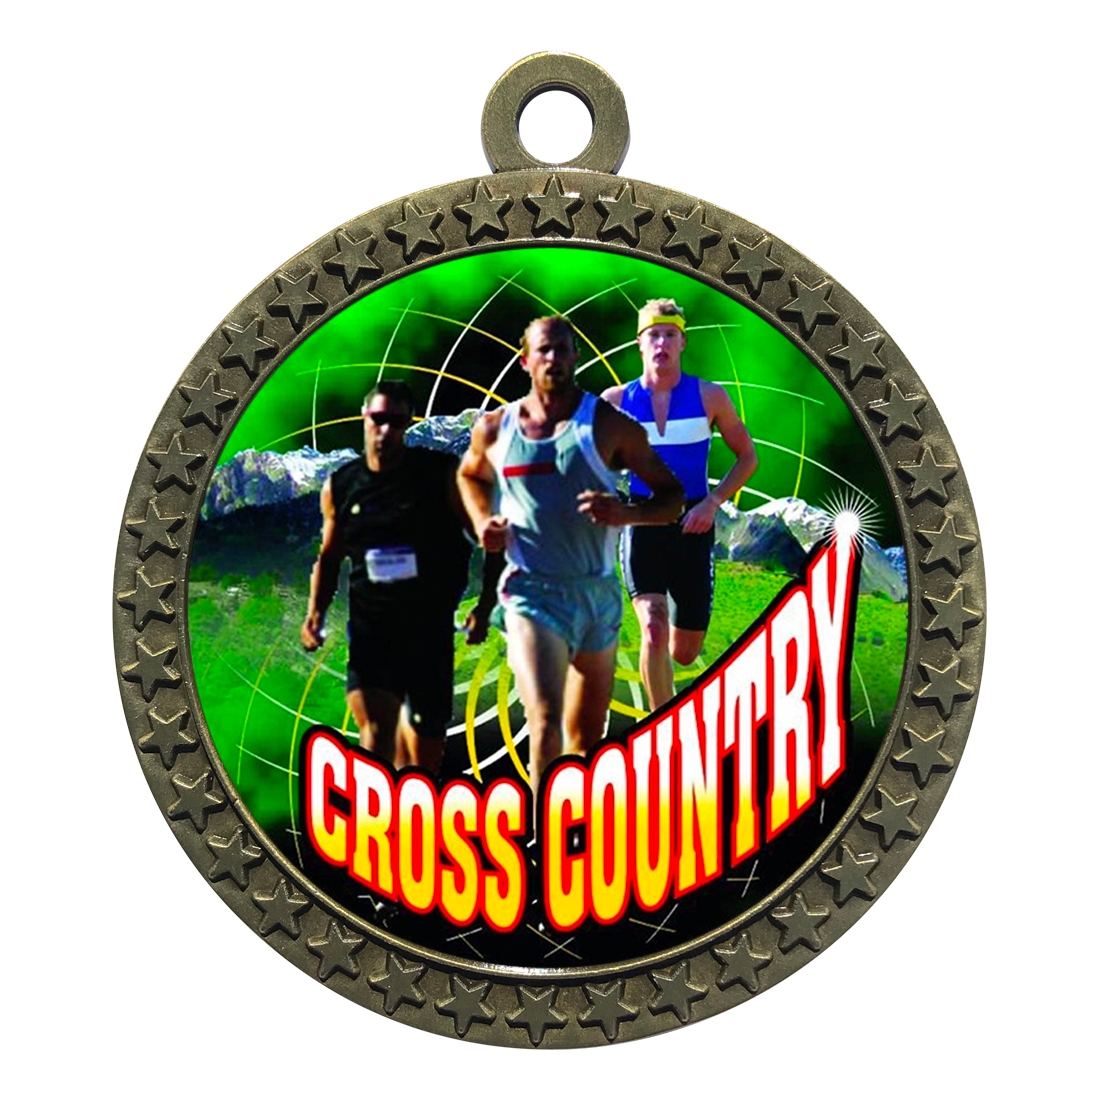 2-1/2" Male Cross Country Medal